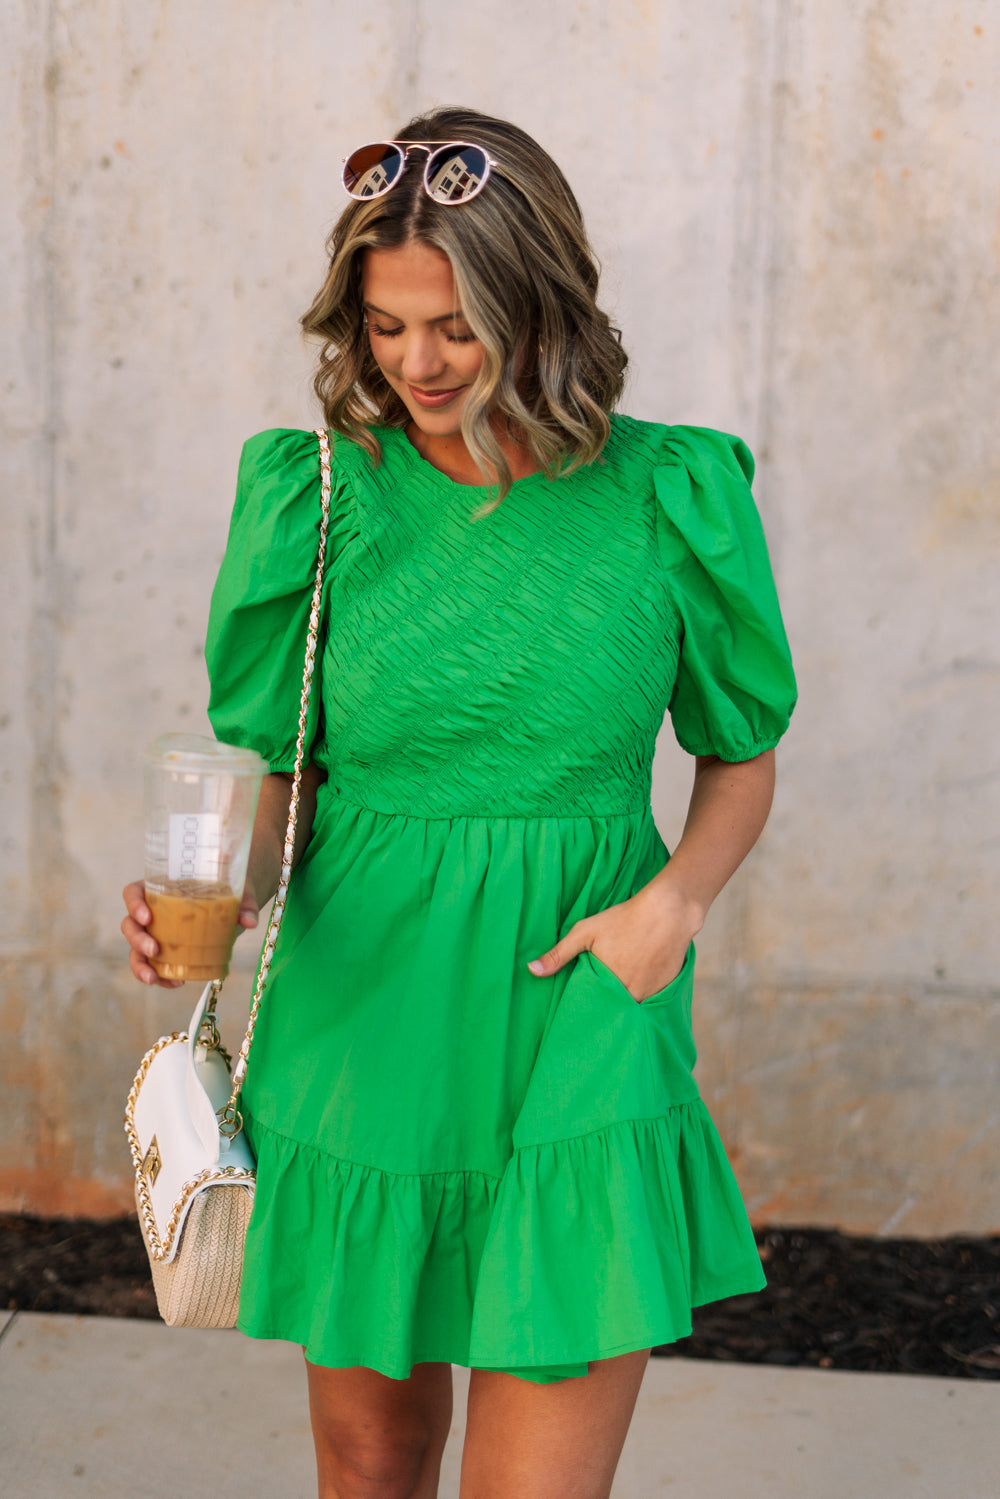 front view of female model wearing the Lea Green Puff Sleeve Mini Dress that has kelly green fabric, a smocked upper with high neck, short puff sleeves, and mini length. Model is holding coffee and has purse on shoulder.